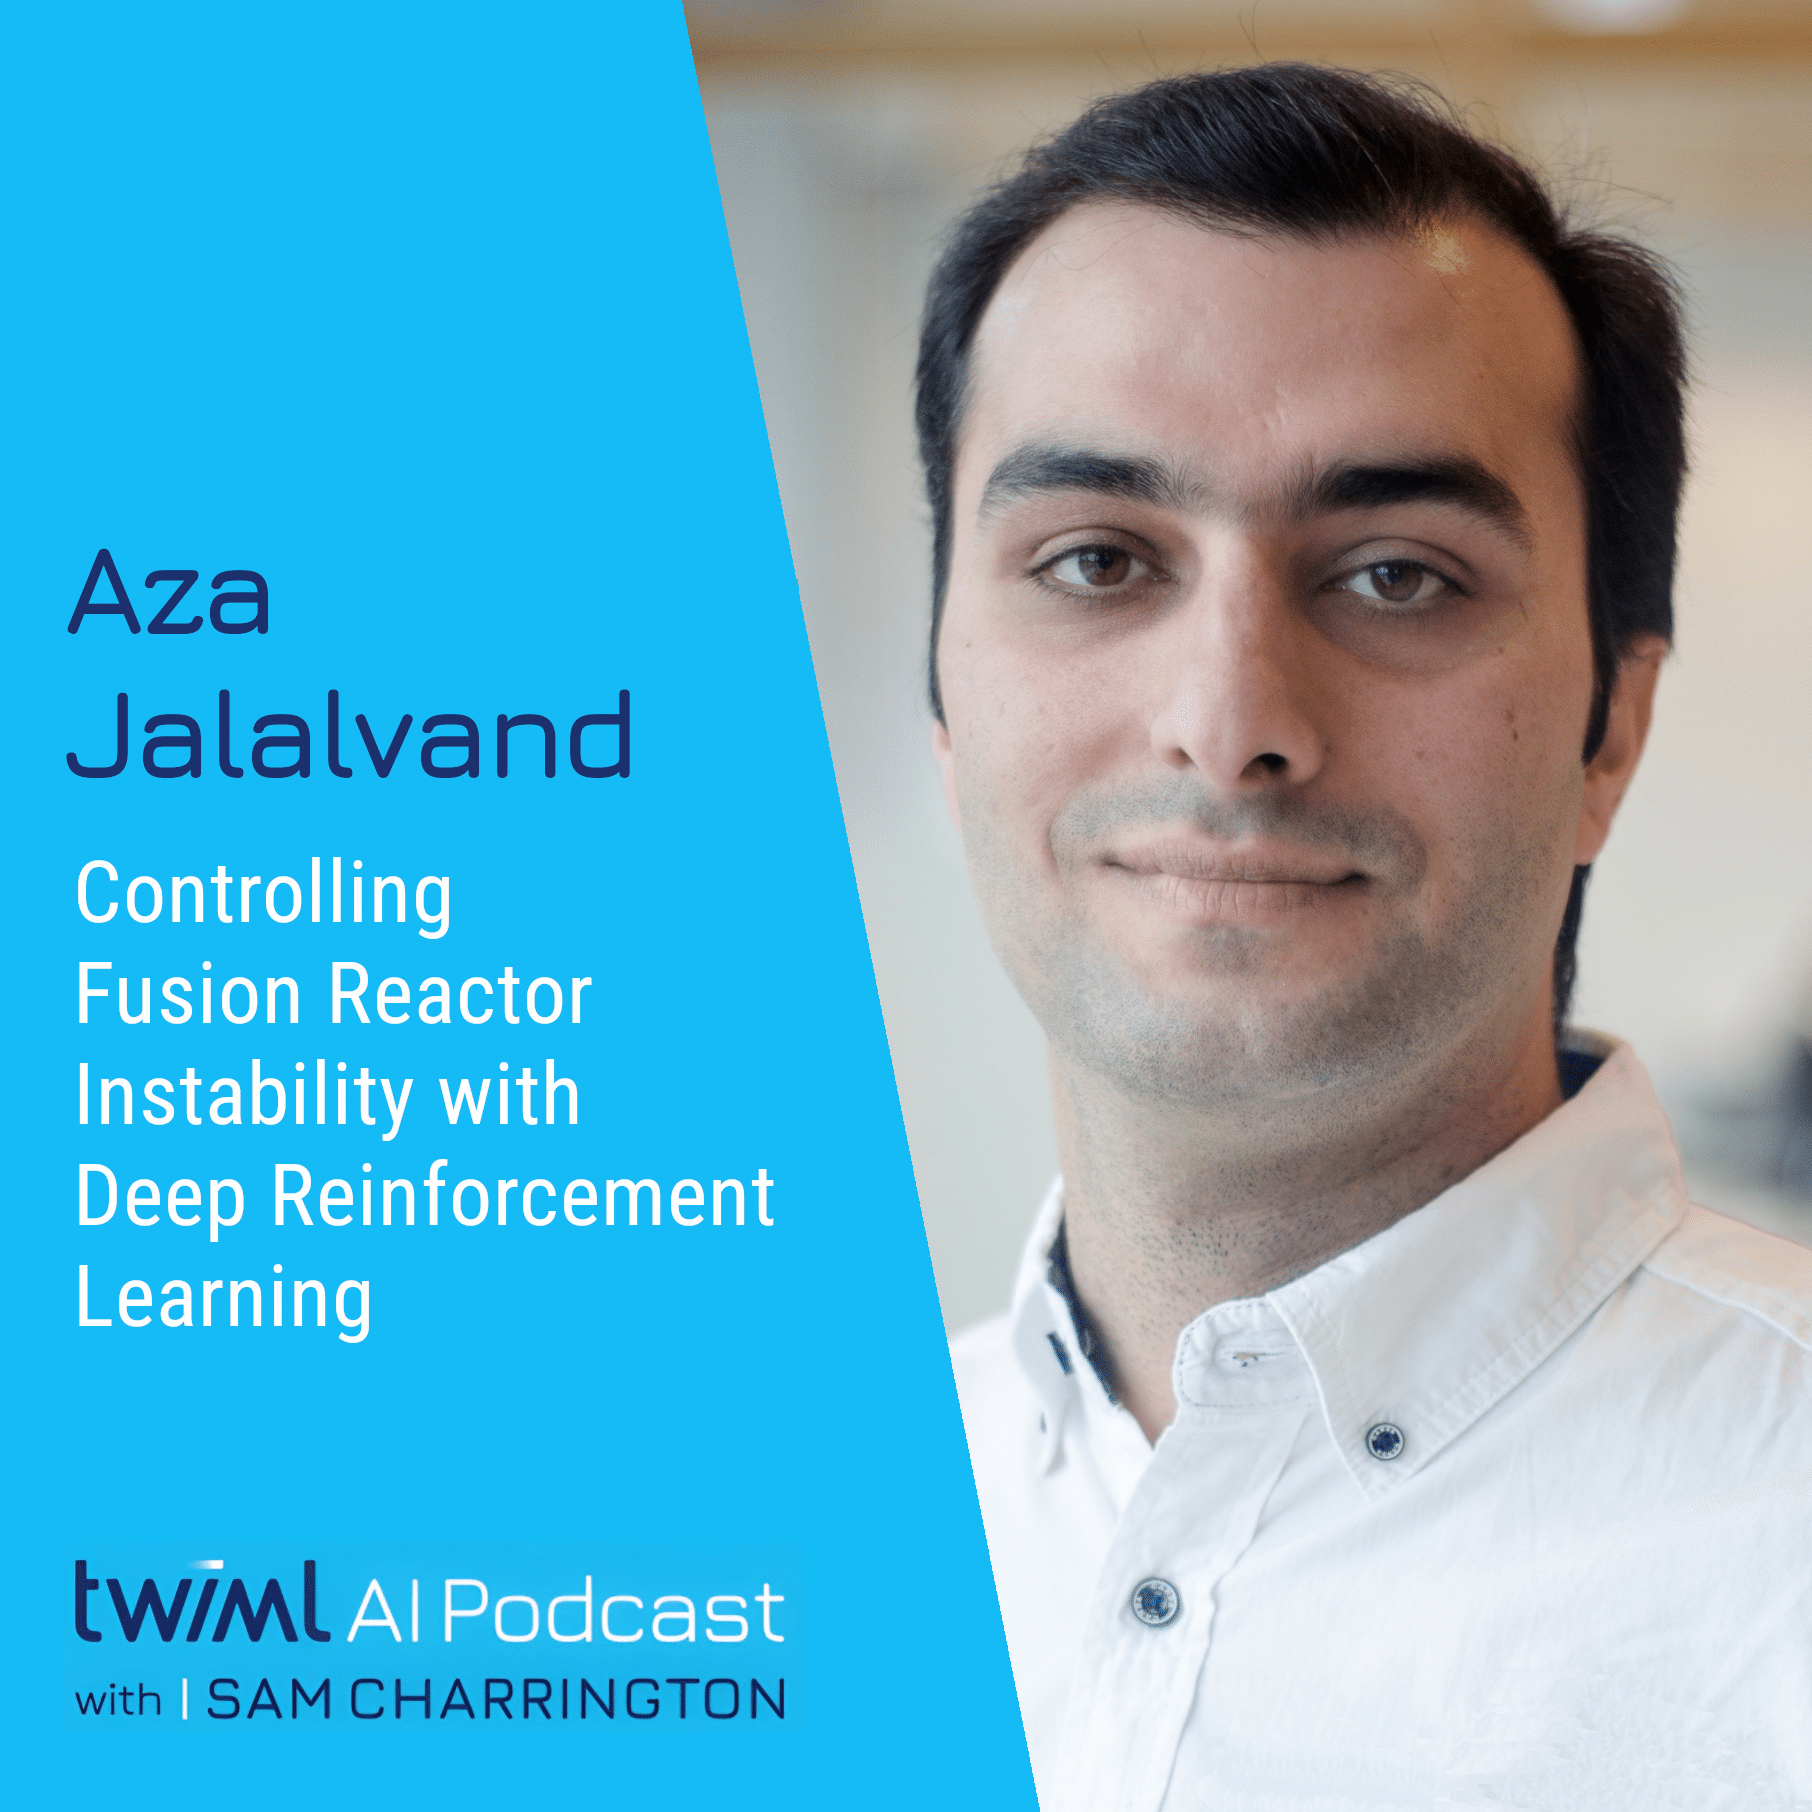 twiml-controlling-aza-jalalvand-fusion-reactor-instability-with-deep-reinforcement-learning-sq